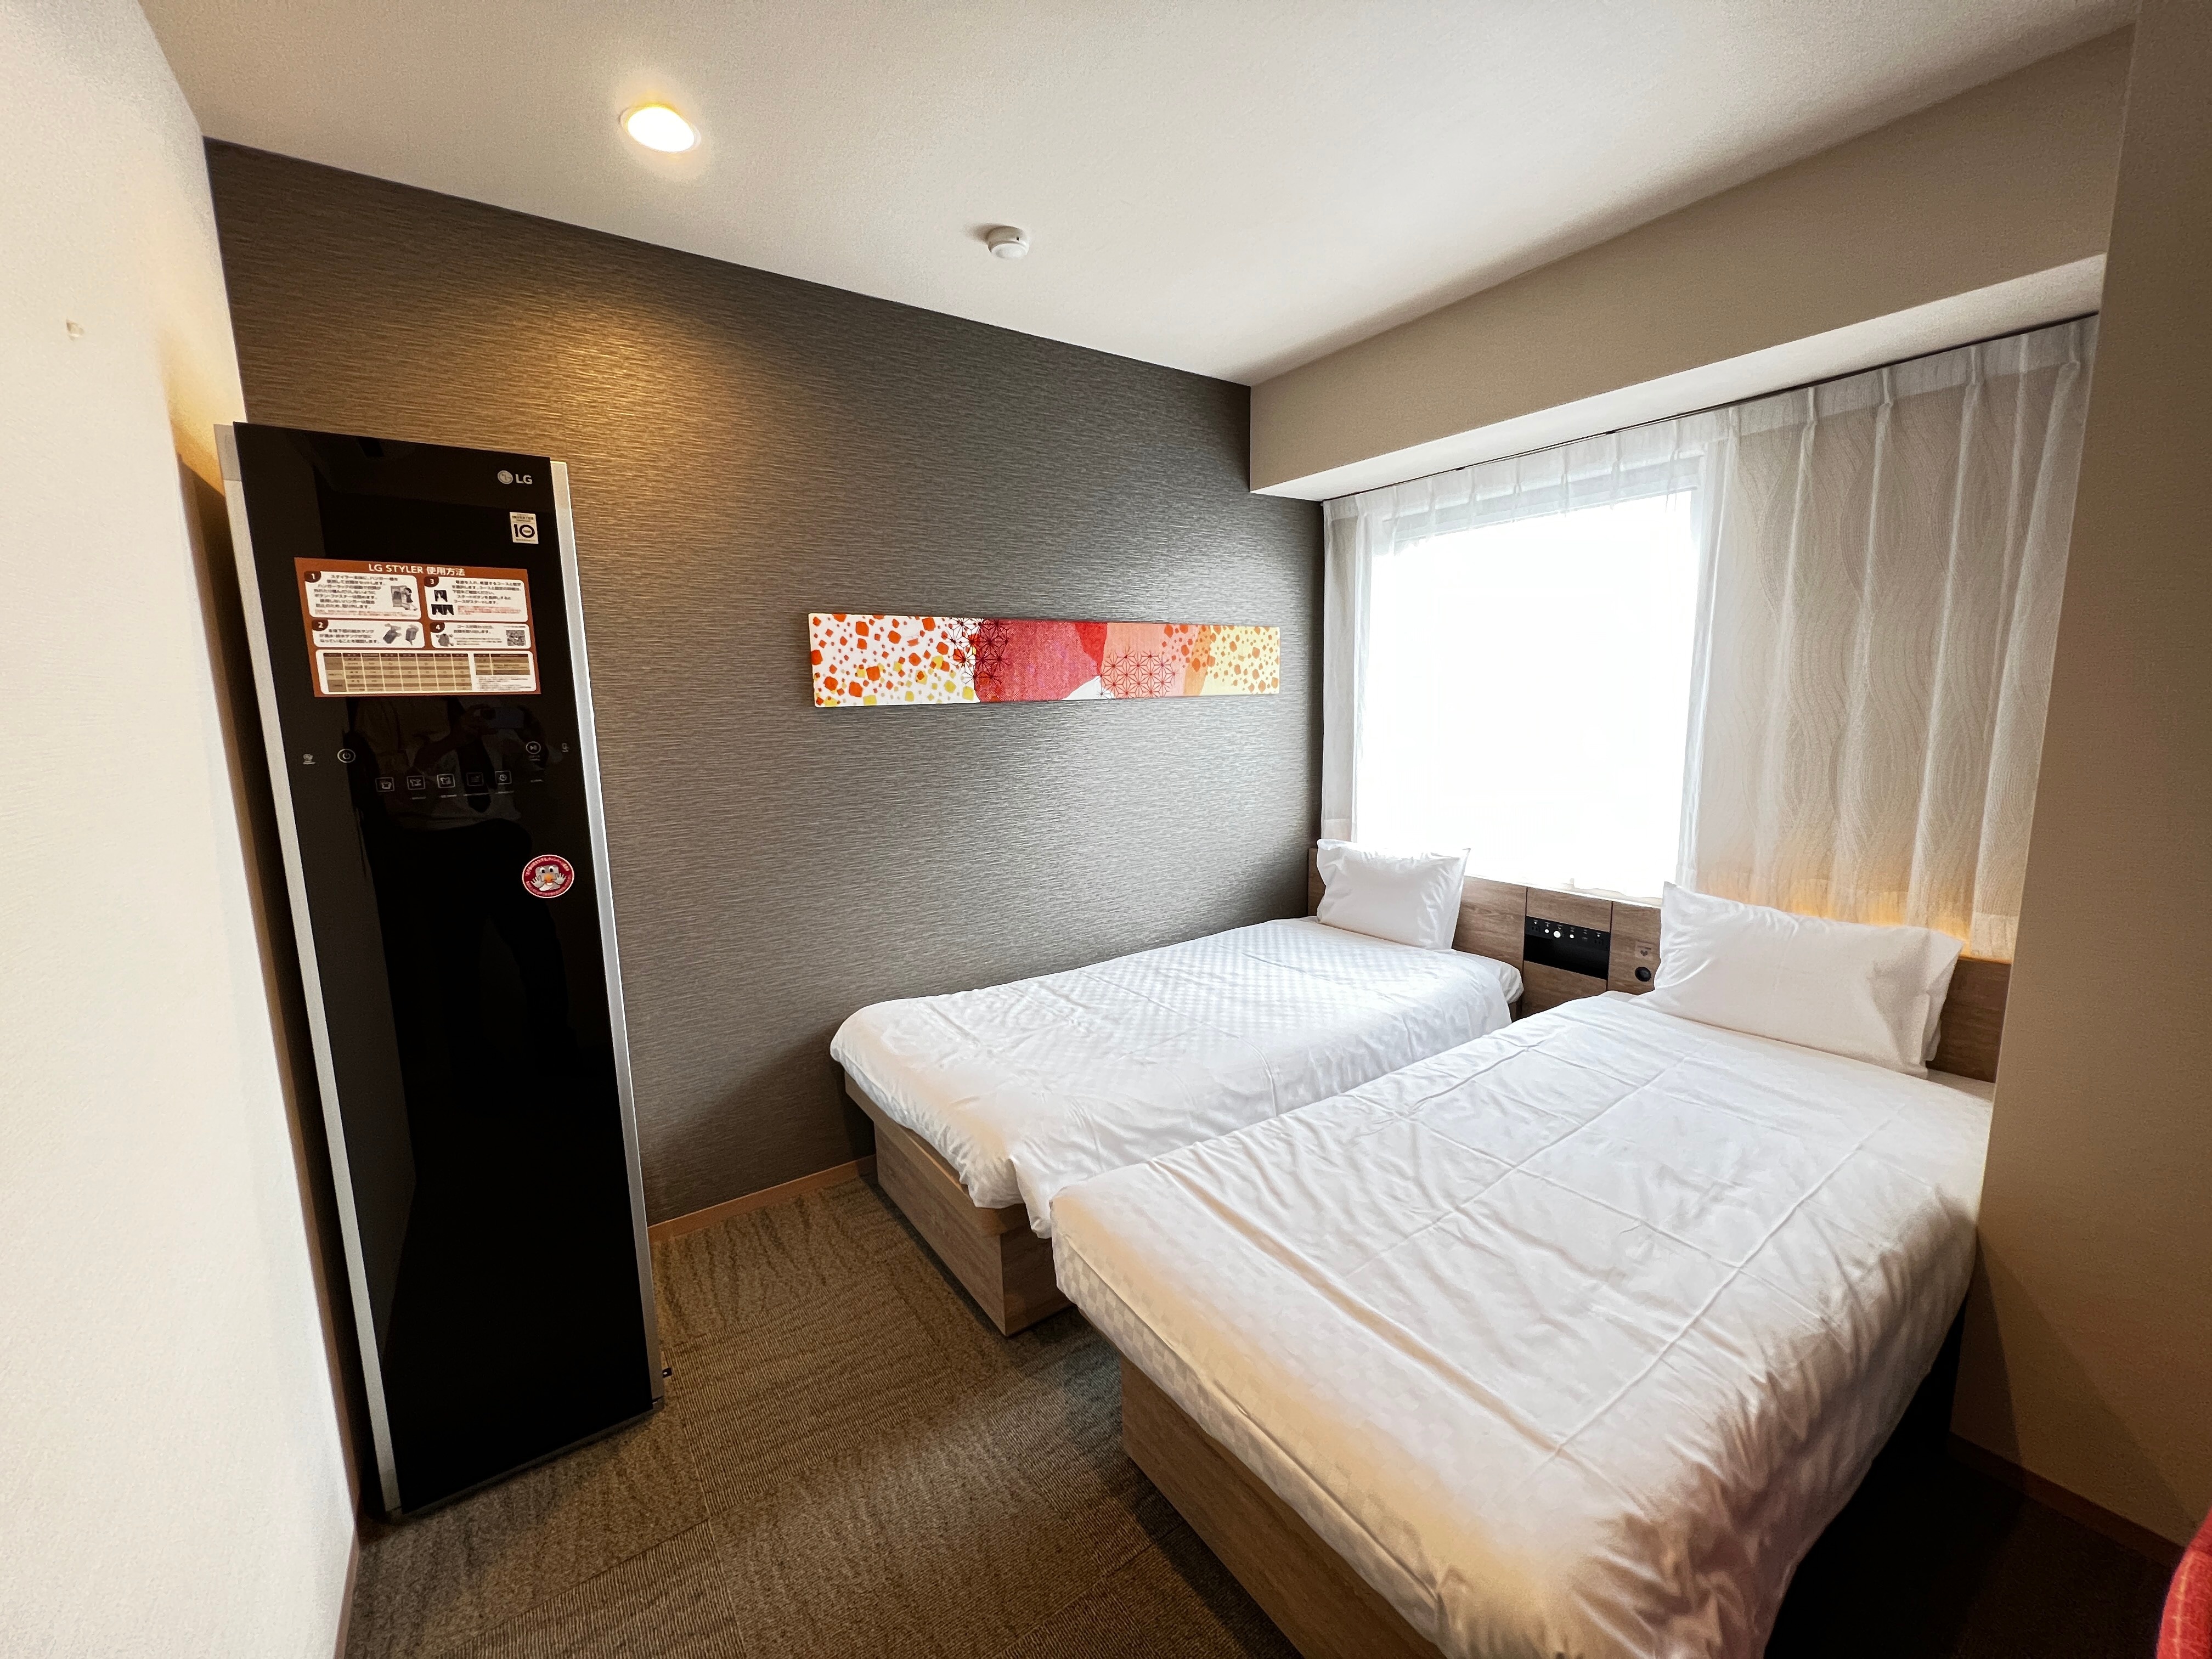 [Standard Twin Room] 2 adults + 1 bed-sharing person can stay in a separate type with separate beds